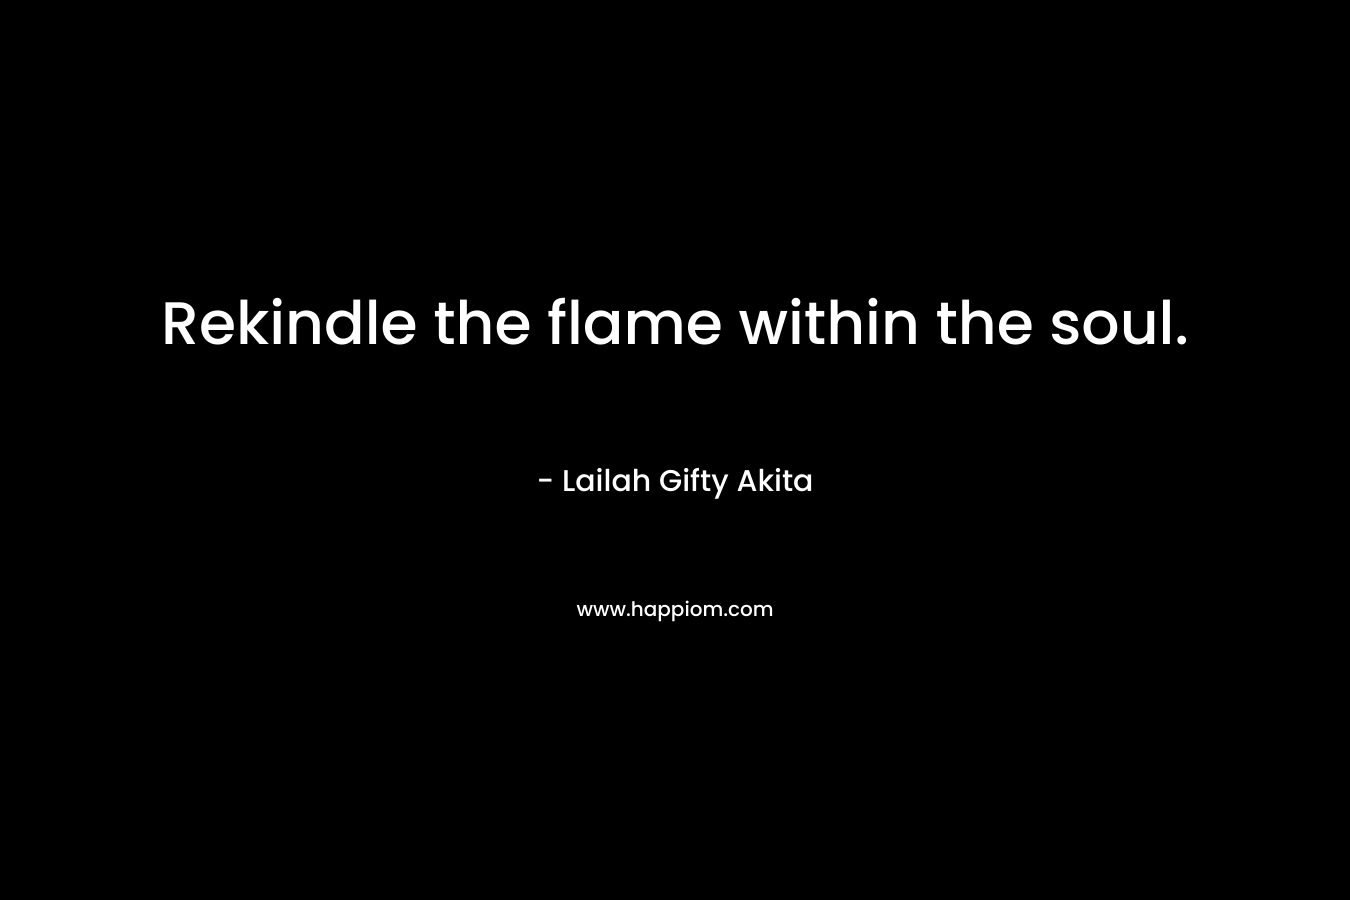 Rekindle the flame within the soul.